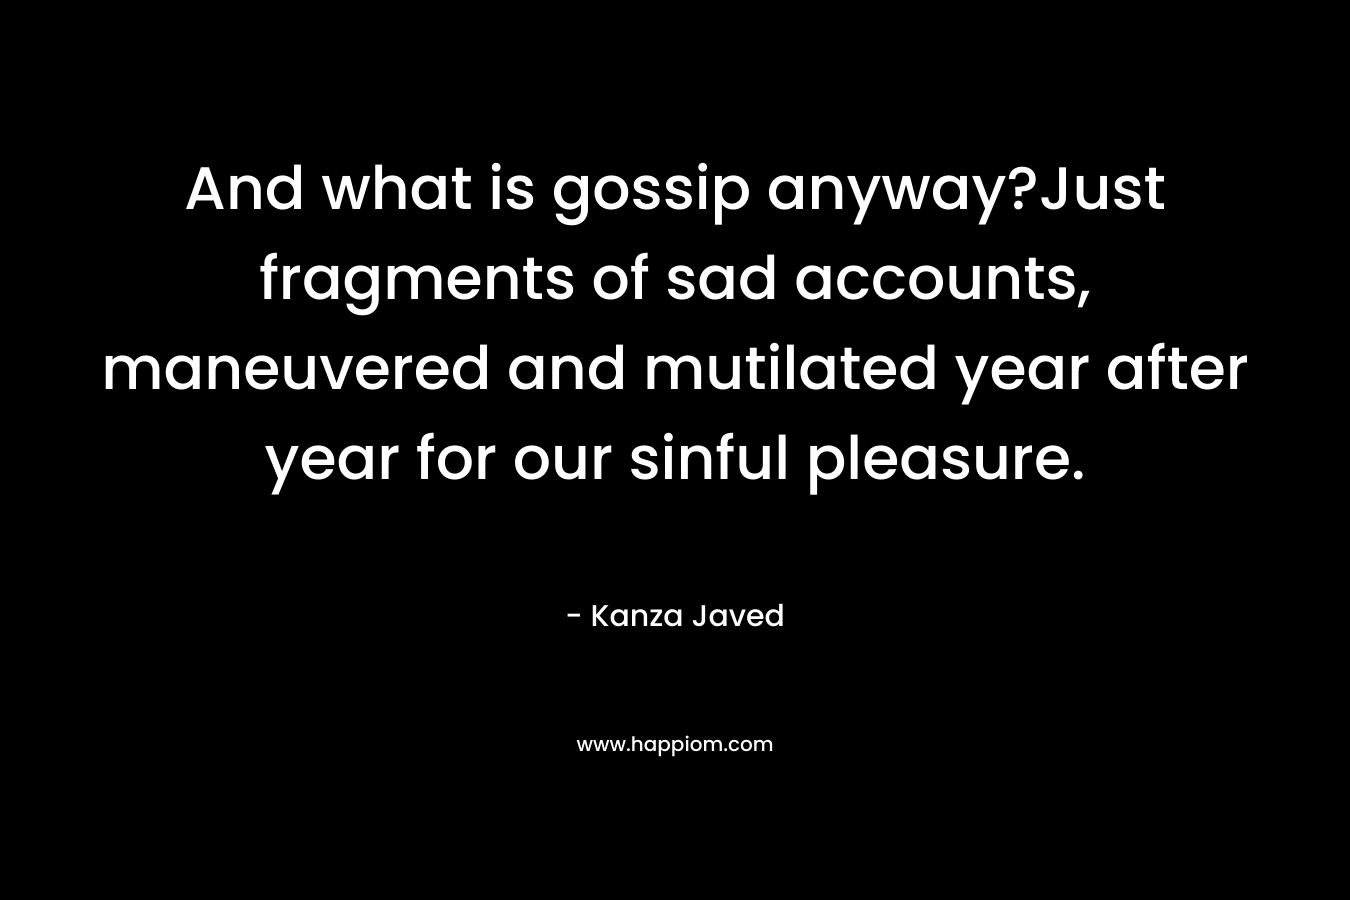 And what is gossip anyway?Just fragments of sad accounts, maneuvered and mutilated year after year for our sinful pleasure.